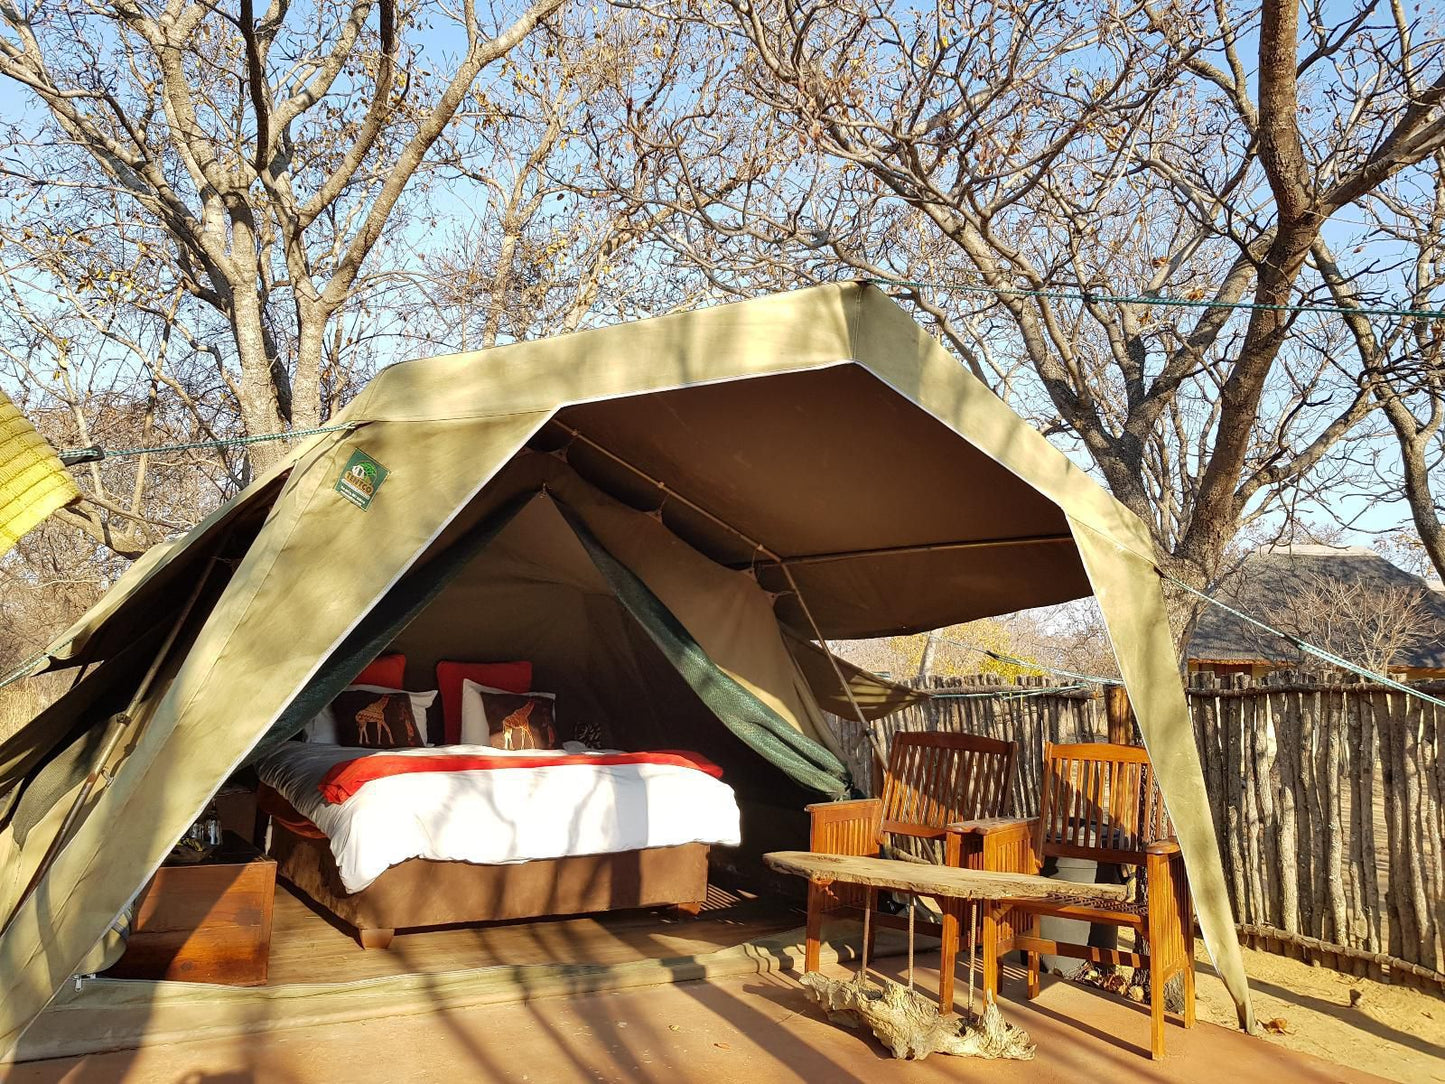 Ama Amanzi Bush Lodge Vaalwater Limpopo Province South Africa Tent, Architecture